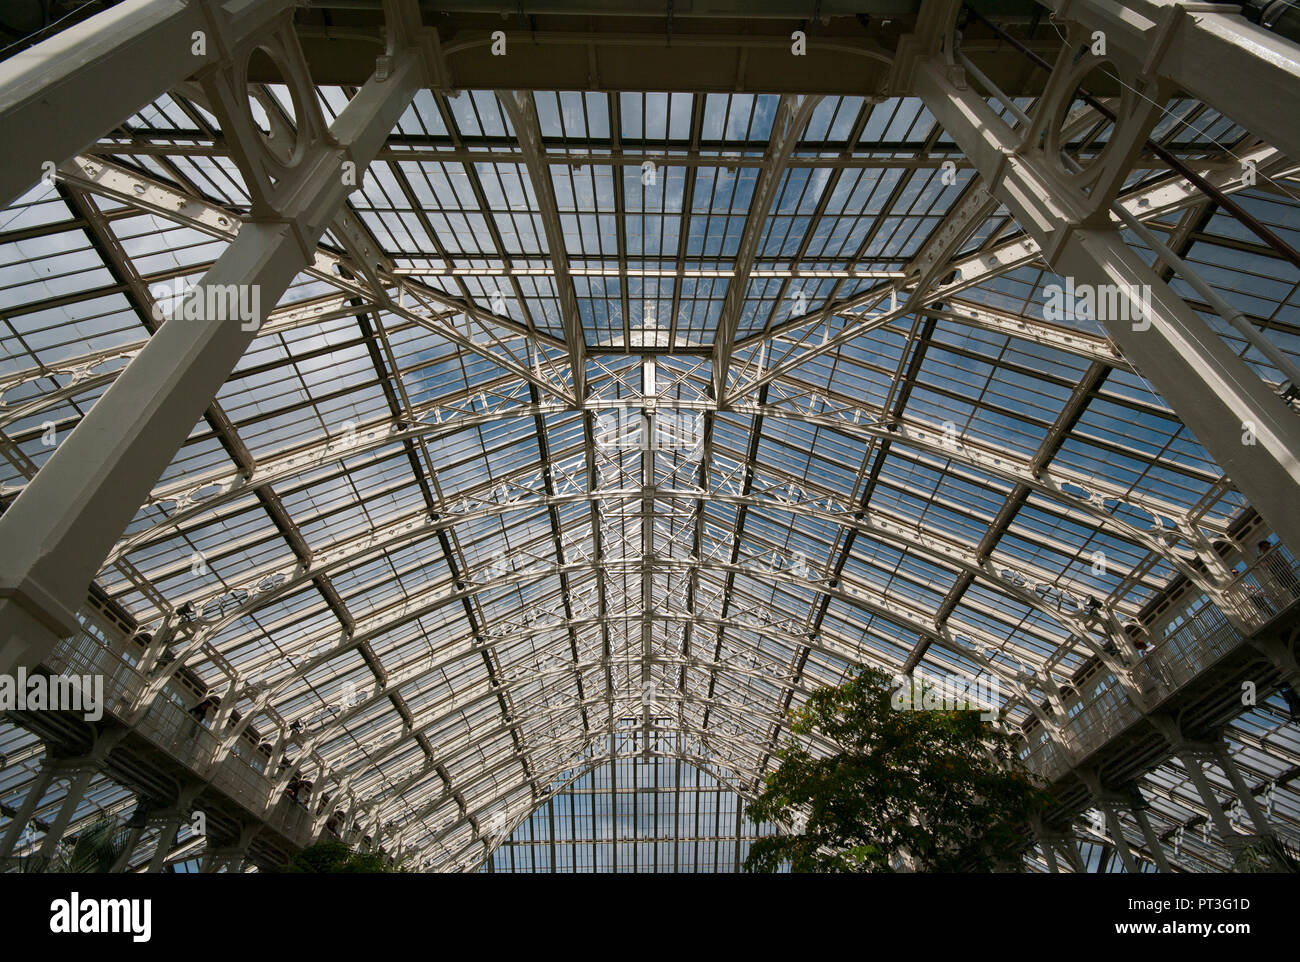 The Glass and Metal Roof Structure Of The Temperate House in The Royal Botanic Gardens Kew Gardens London England UK Stock Photo